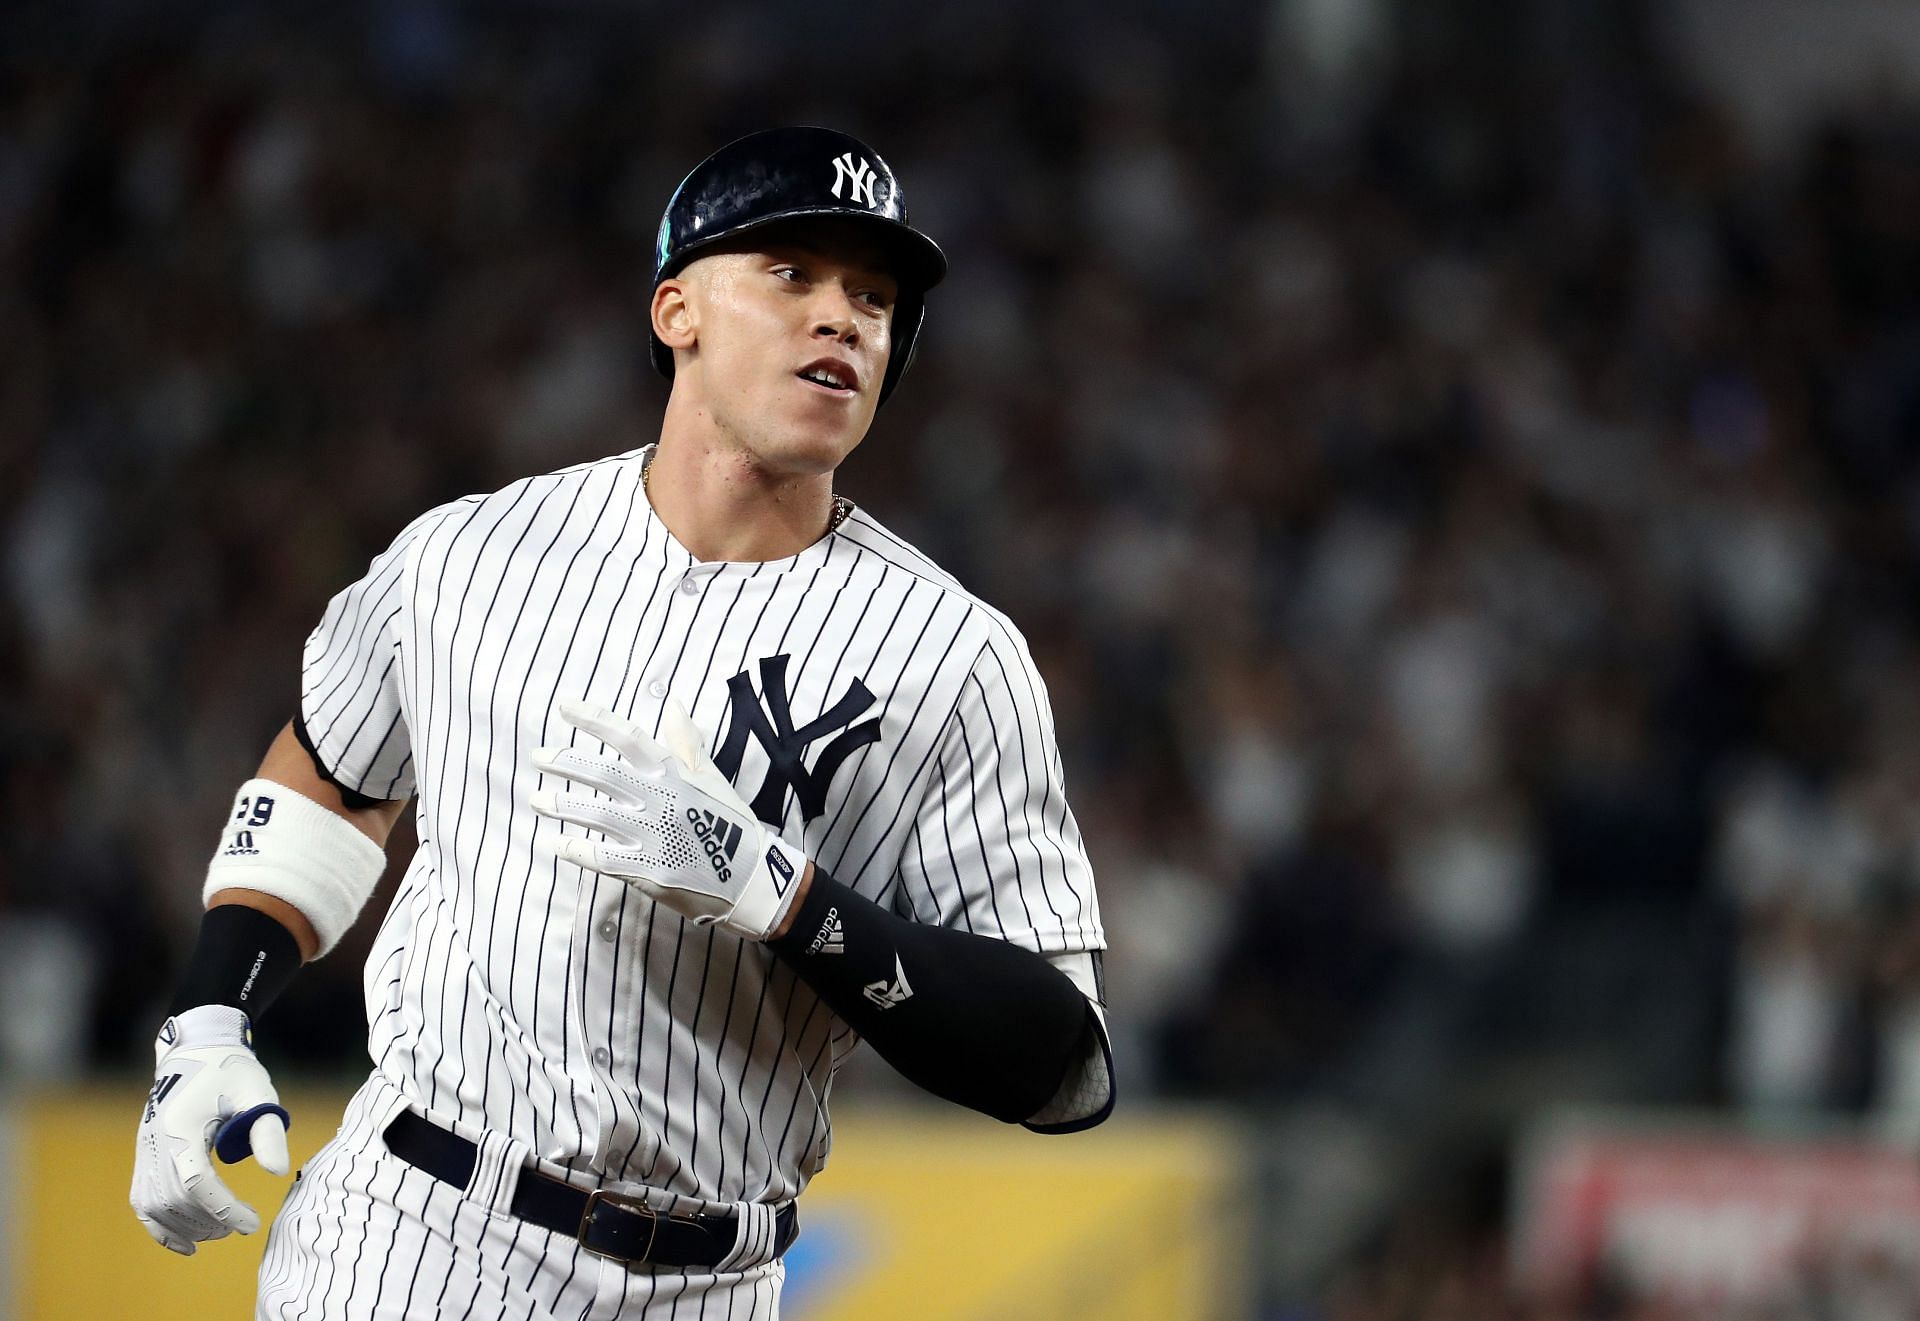 Aaron Judge made a huge bet when he turned down an extension offer this Spring. Will the gamble pay off?